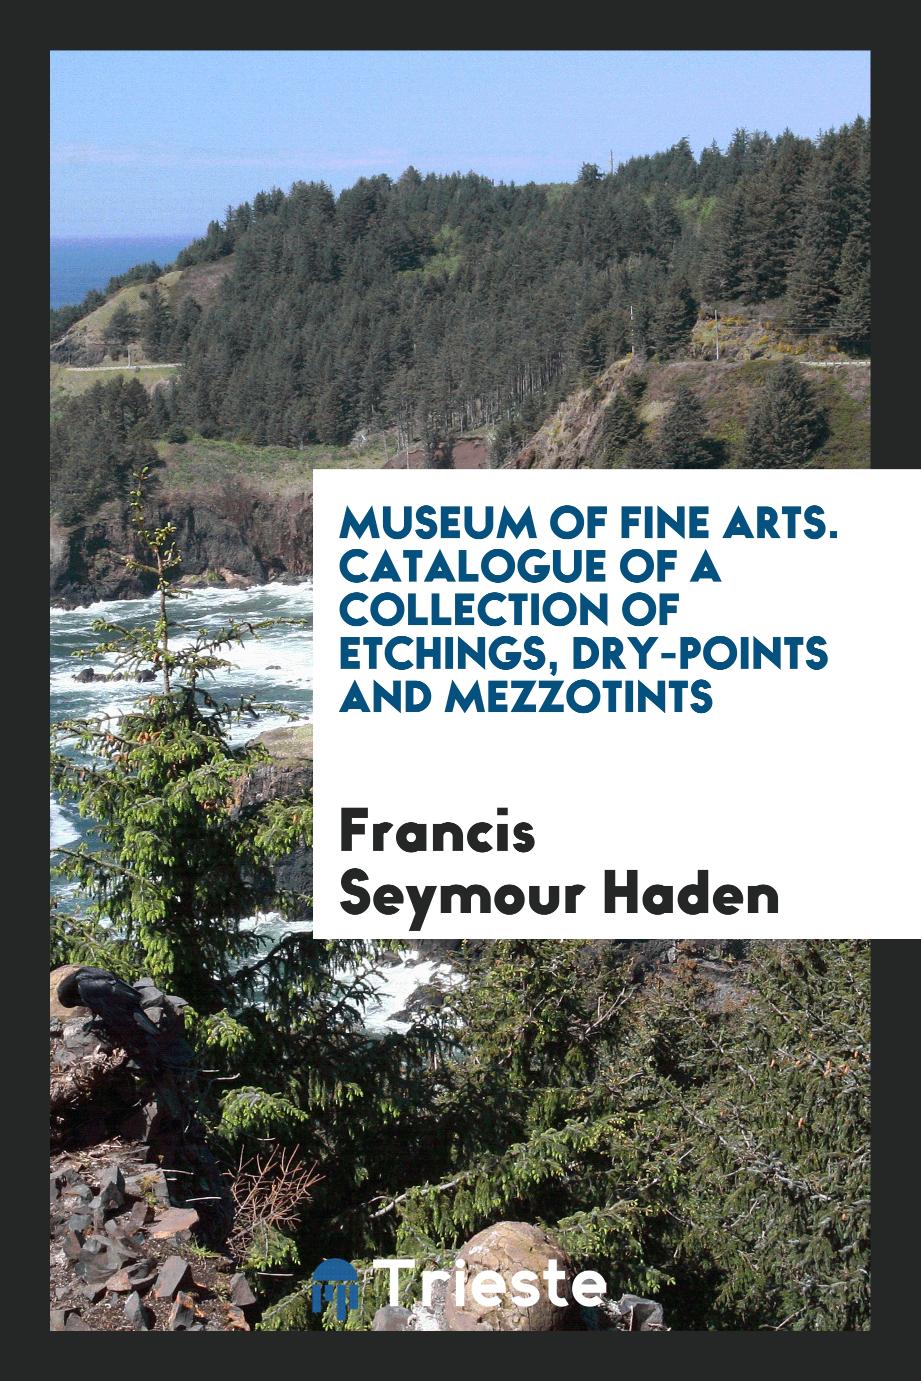 Museum of fine arts. Catalogue of a collection of etchings, dry-points and mezzotints